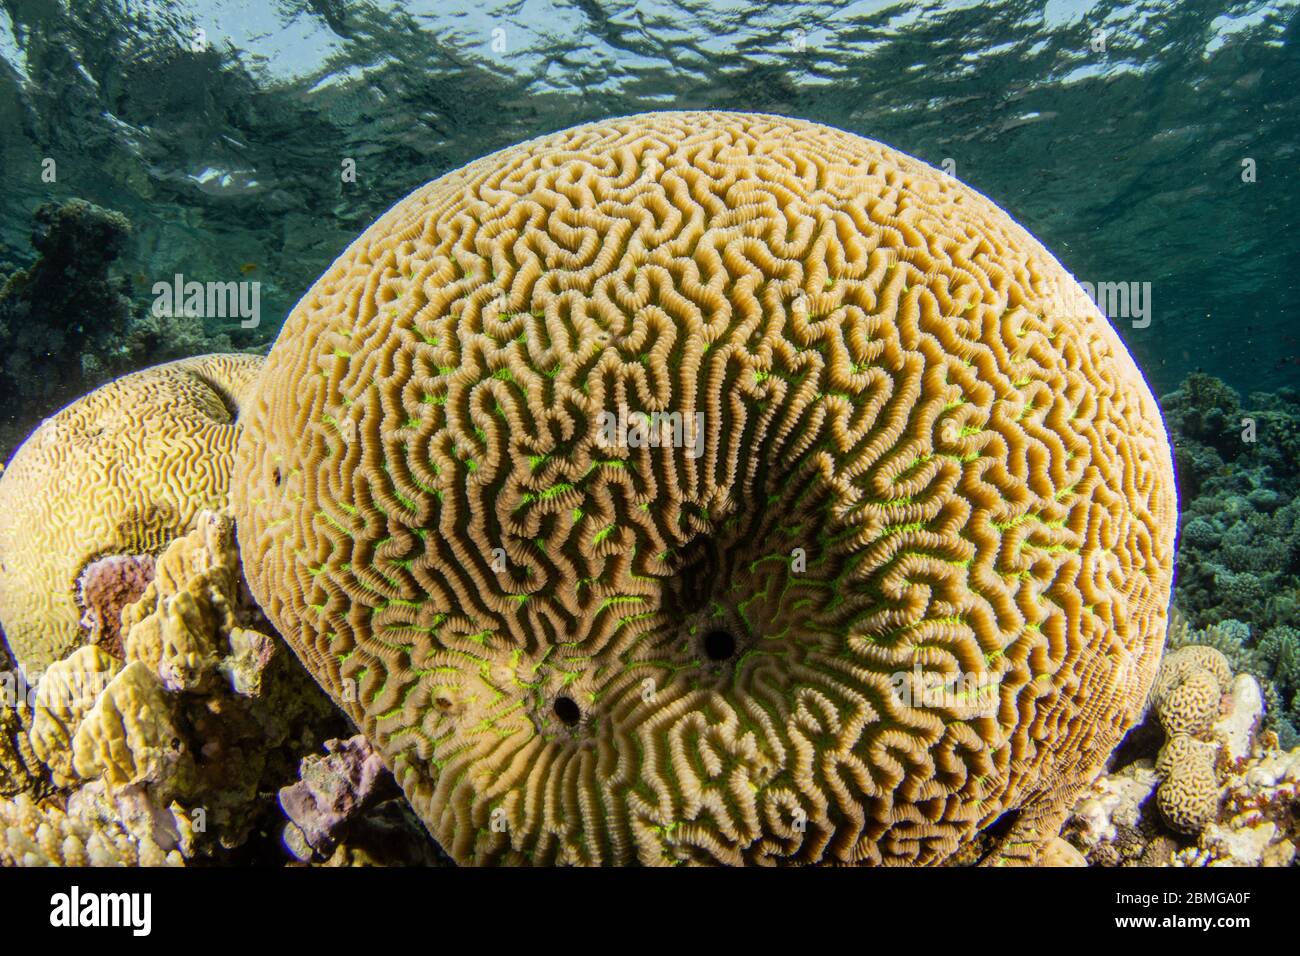 Boulder brain coral in the shallow water Stock Photo